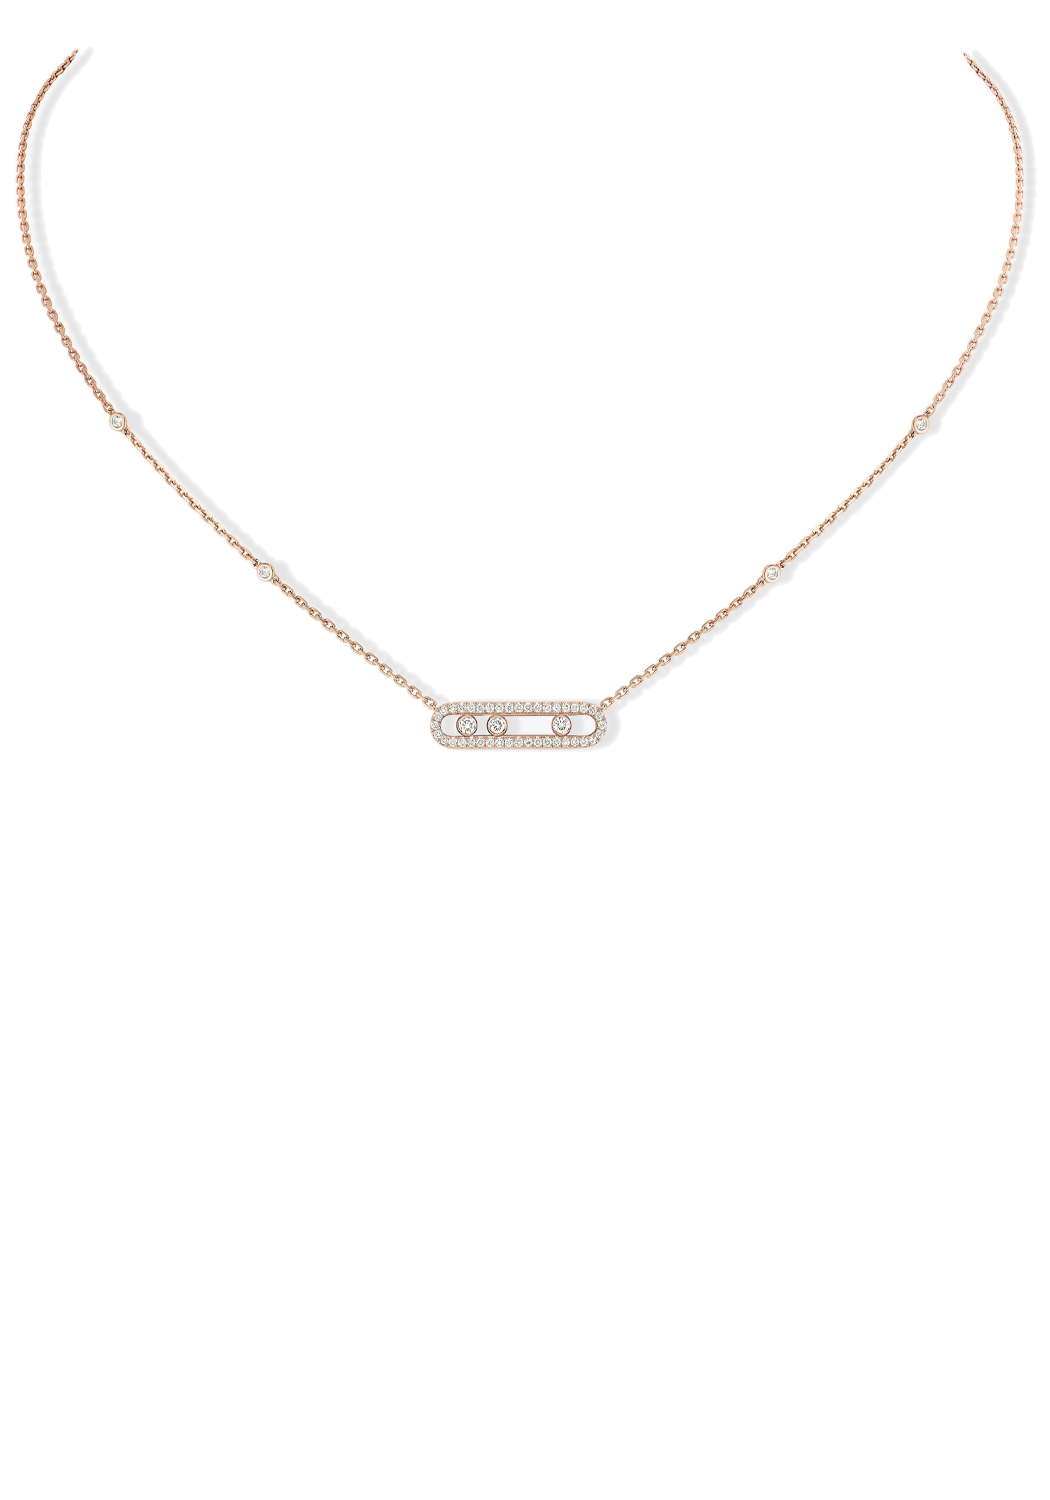 Messika Baby Move Pave 18KRG Diamond Necklace | Ref. 04322-PG | OsterJewelers.com